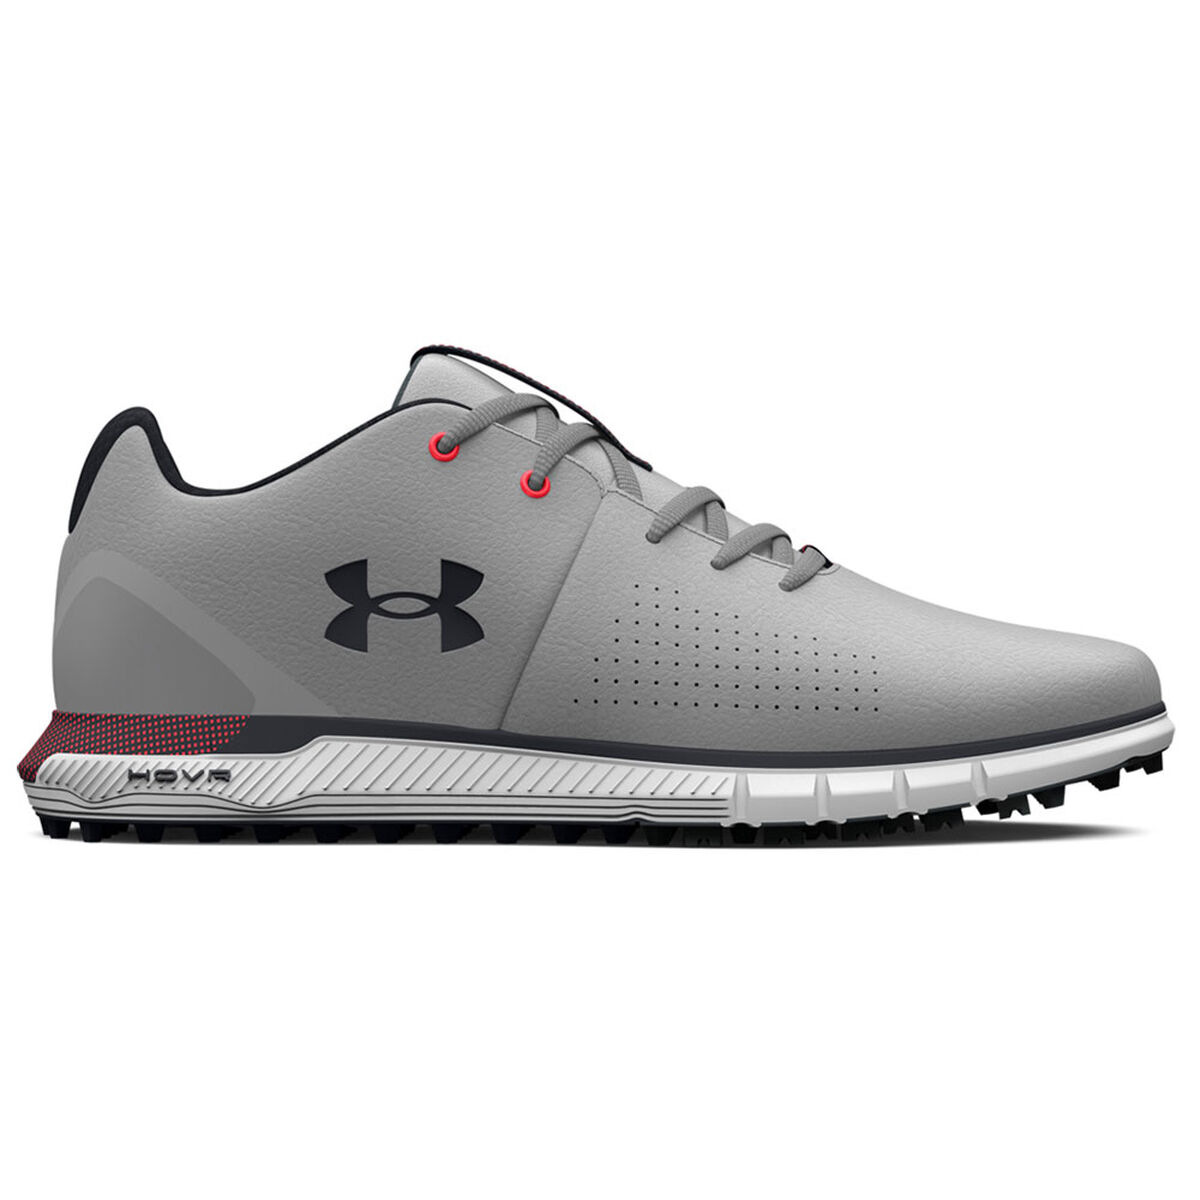 Under Armour Men’s HOVR Fade 2 Spikeless Golf Shoes, Mens, Grey/black/black, 9 | American Golf